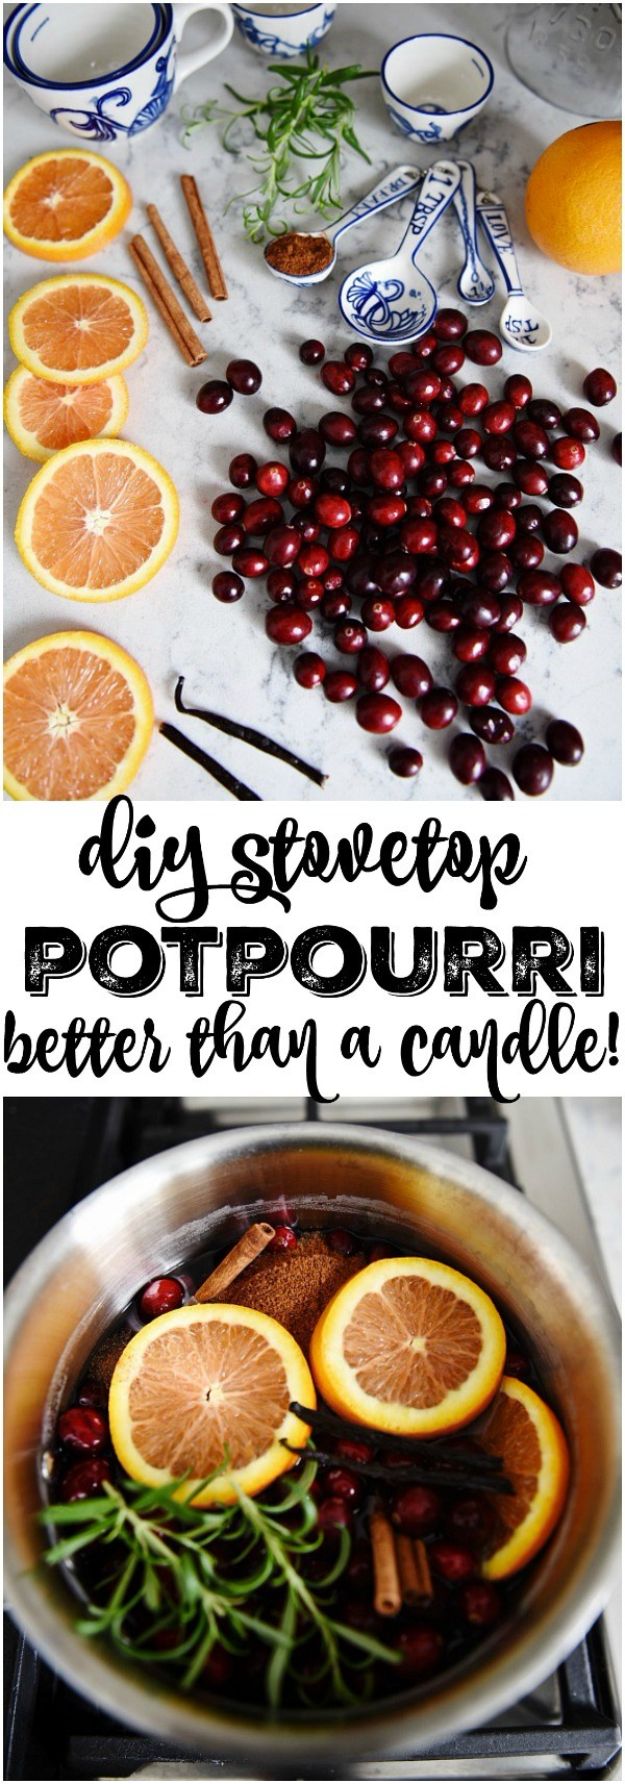 DIY Home Fragrance Ideas - DIY Stovetop Potpourri - Easy Ways To Make your House and Home Smell Good - Essential Oils, Diffusers, DIY Lampe Berger Oil, Candles, Room Scents and Homemade Recipes for Odor Removal - Relaxing Lavender, Fresh Clean Smells, Lemon, Herb 